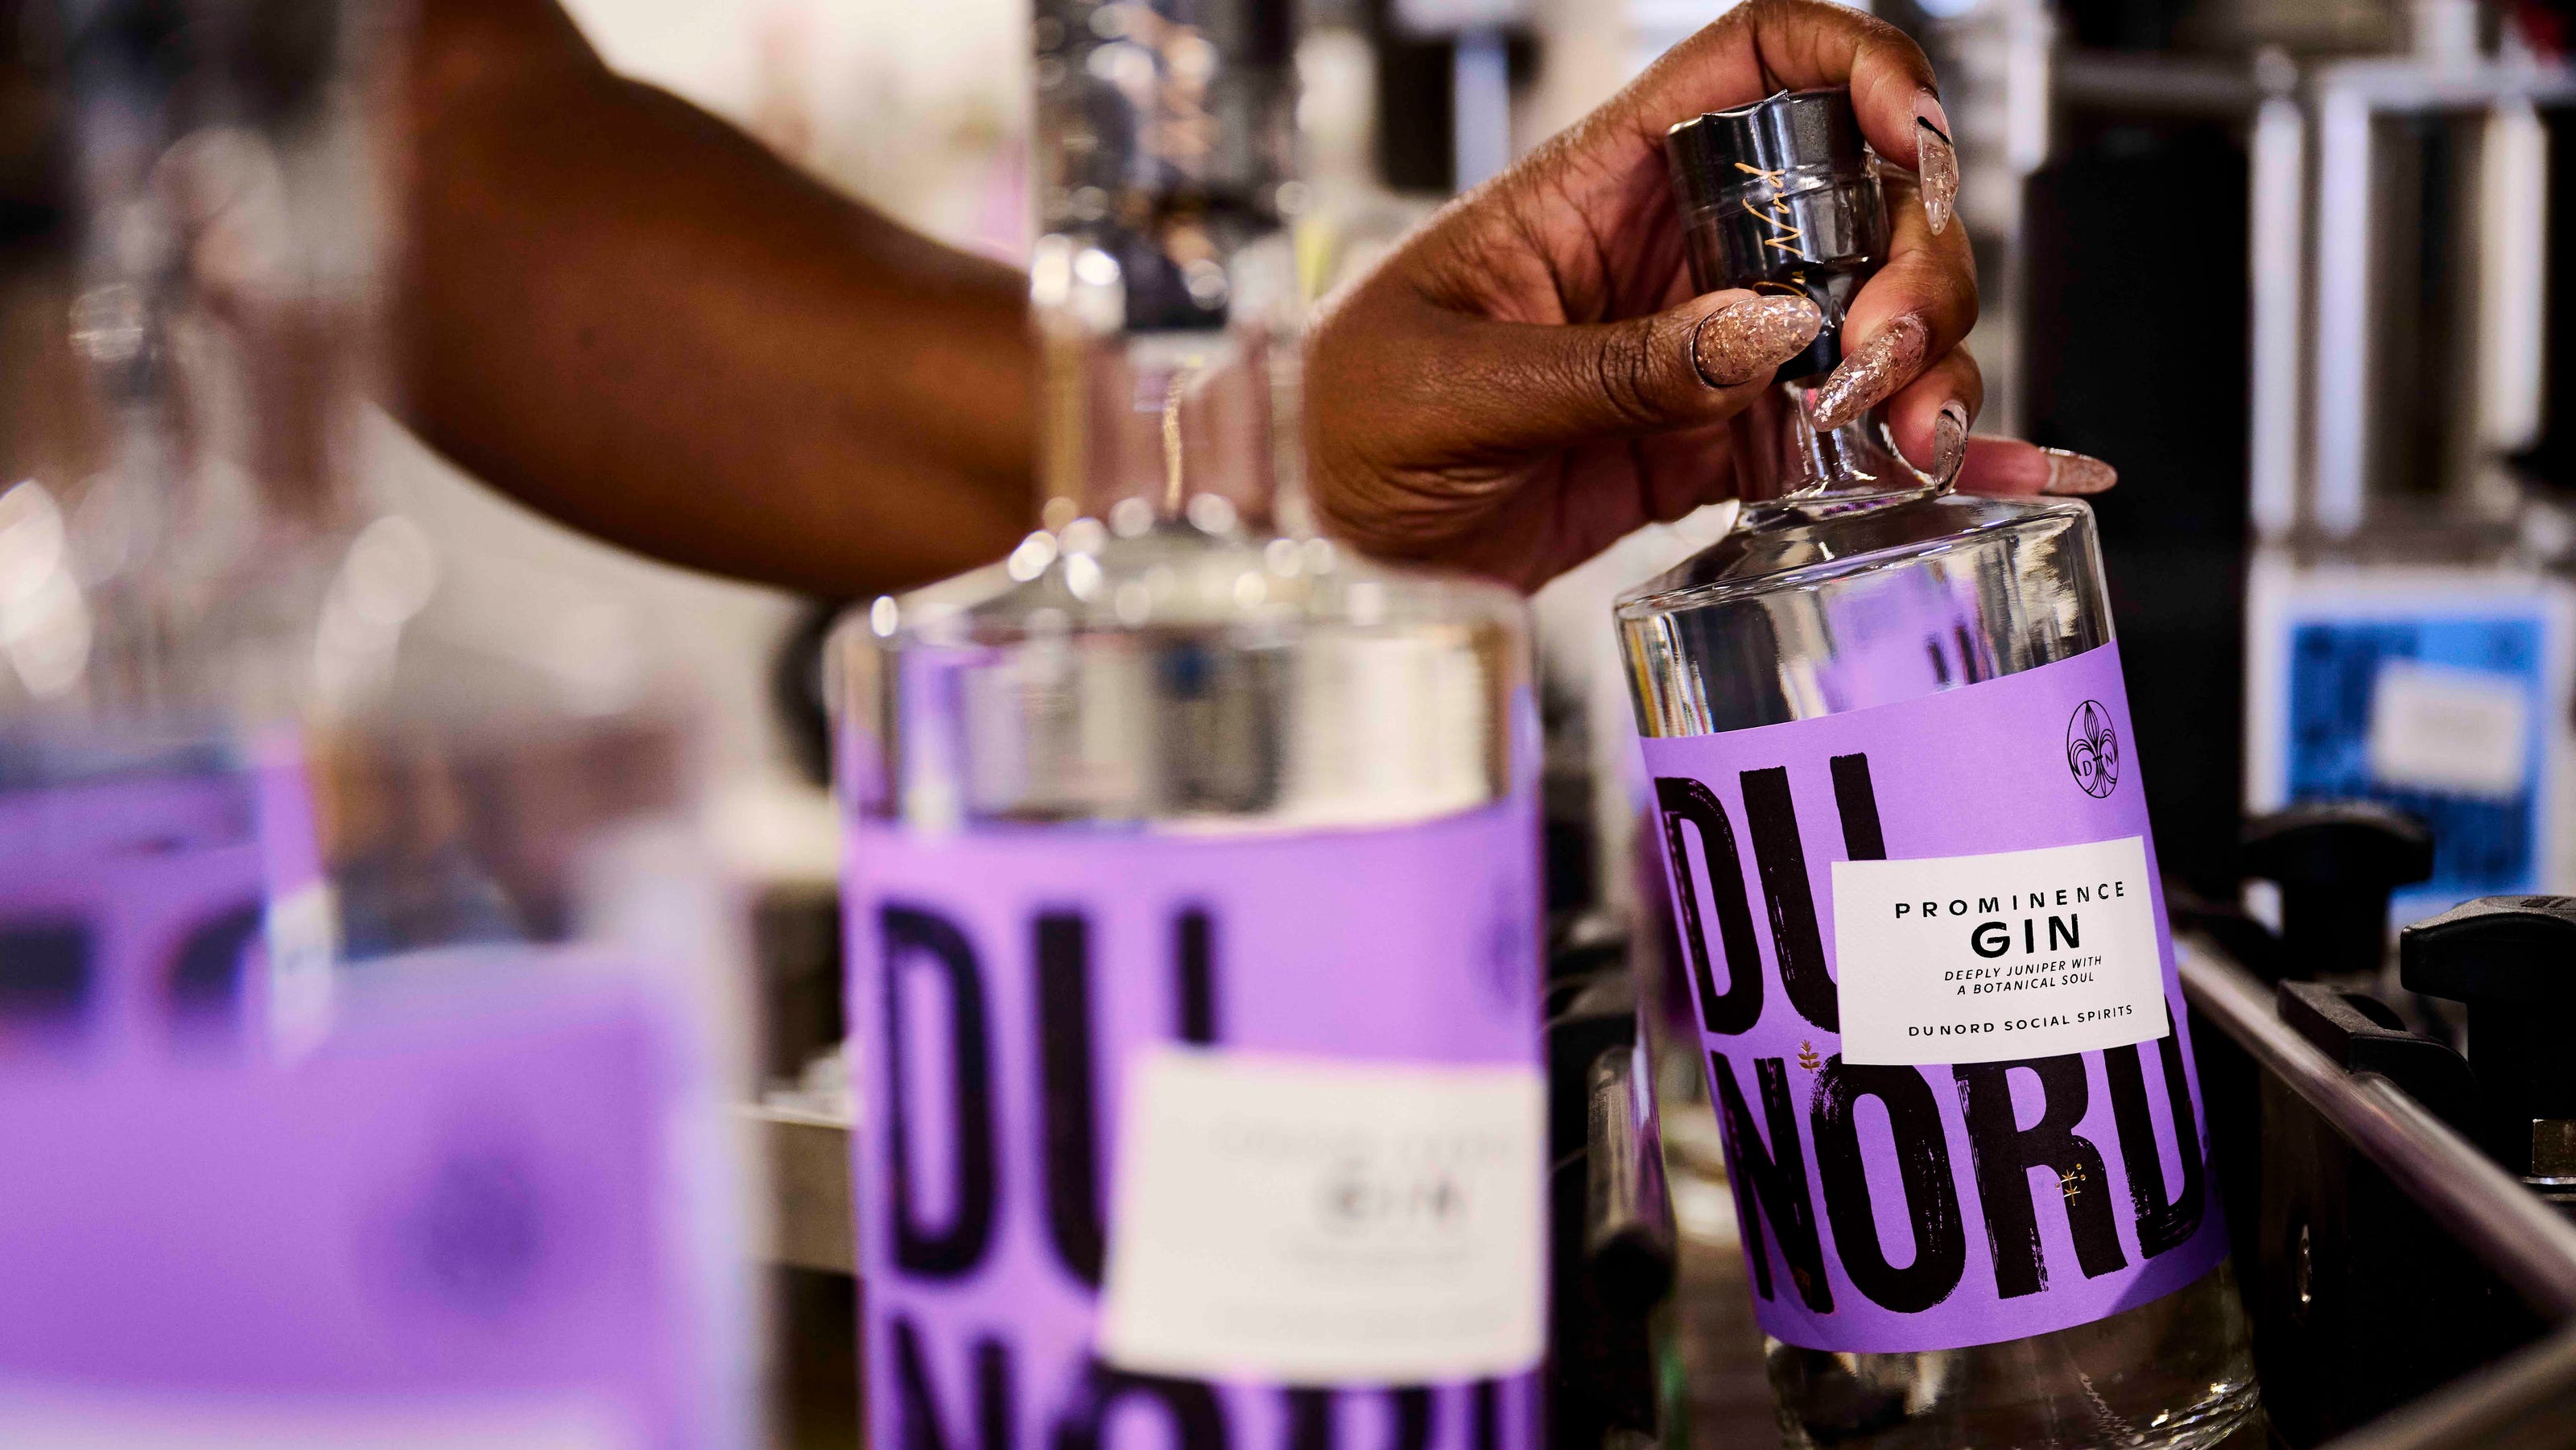  Bolstered by legacy, Black distillers push for diversity in industry: 'You're actually not alone' 